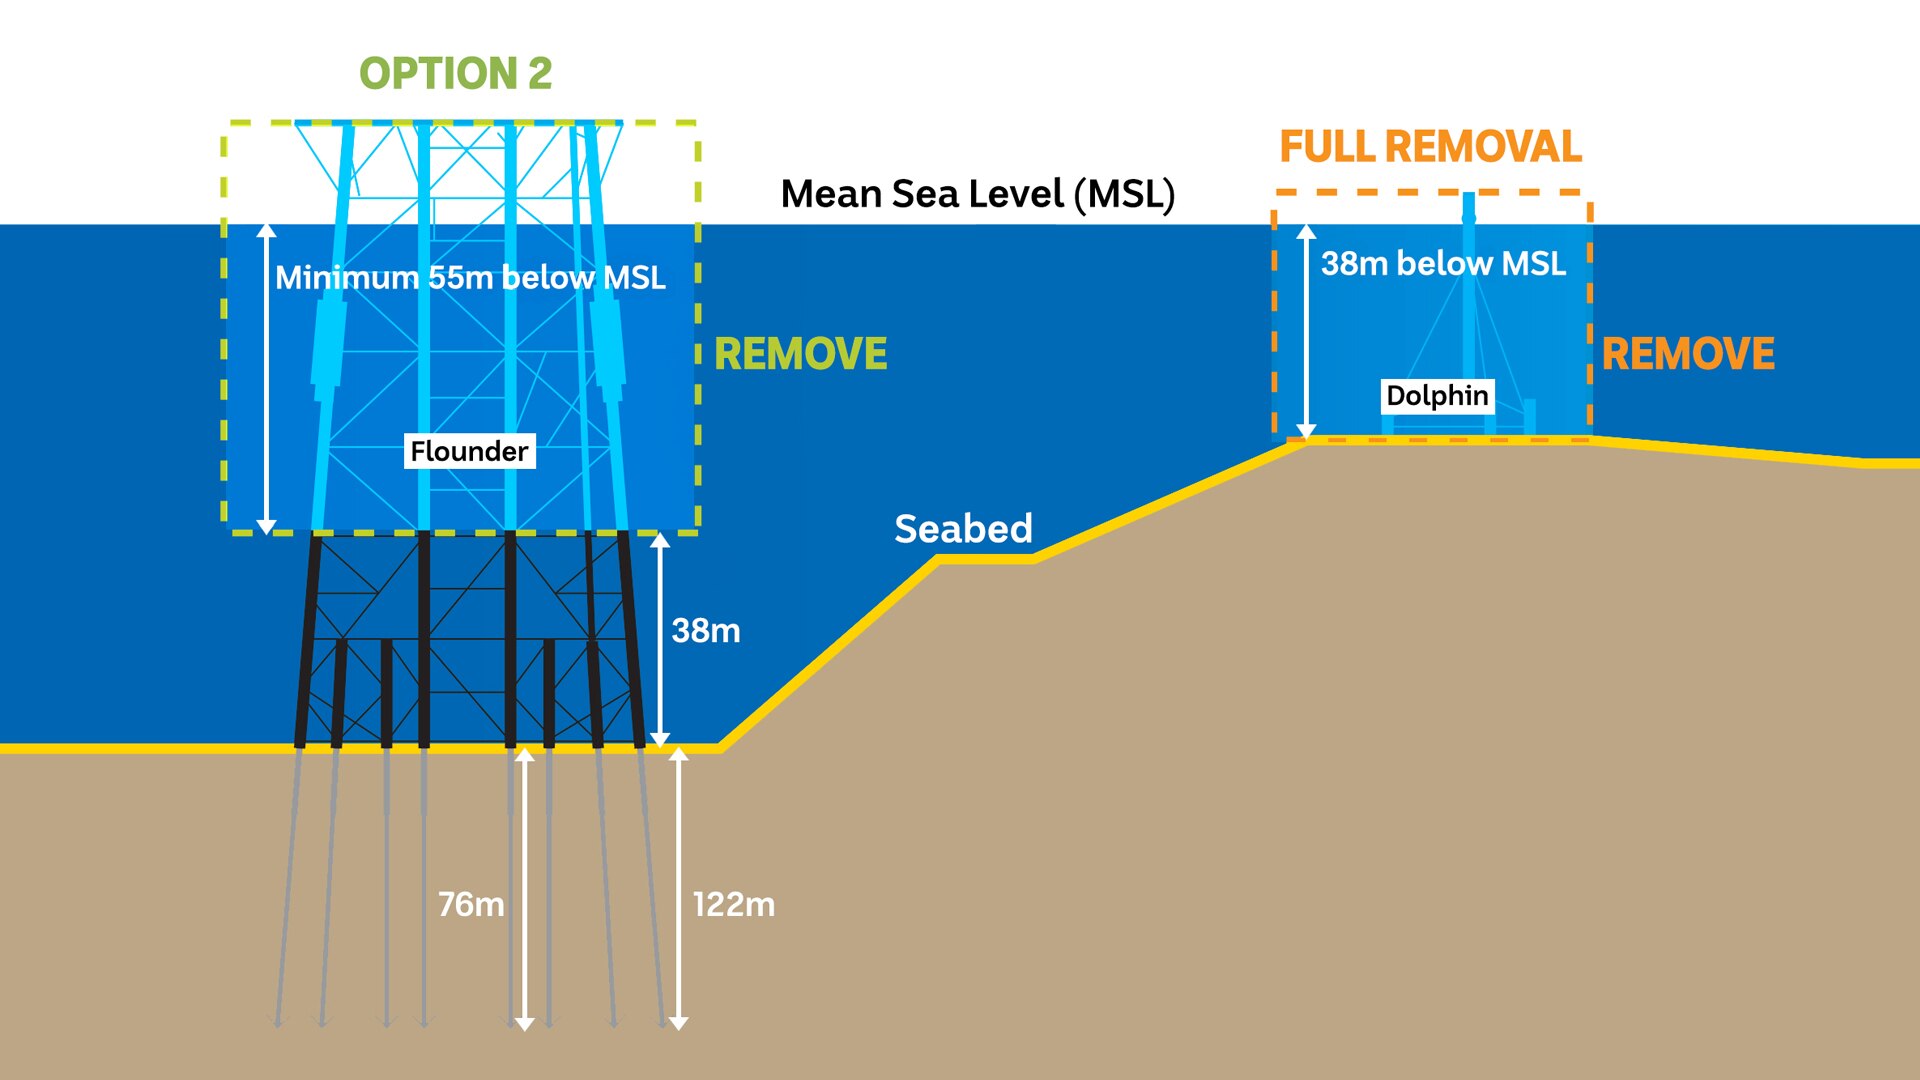 A graphic showing how much of the oil and gas platforms will be removed.